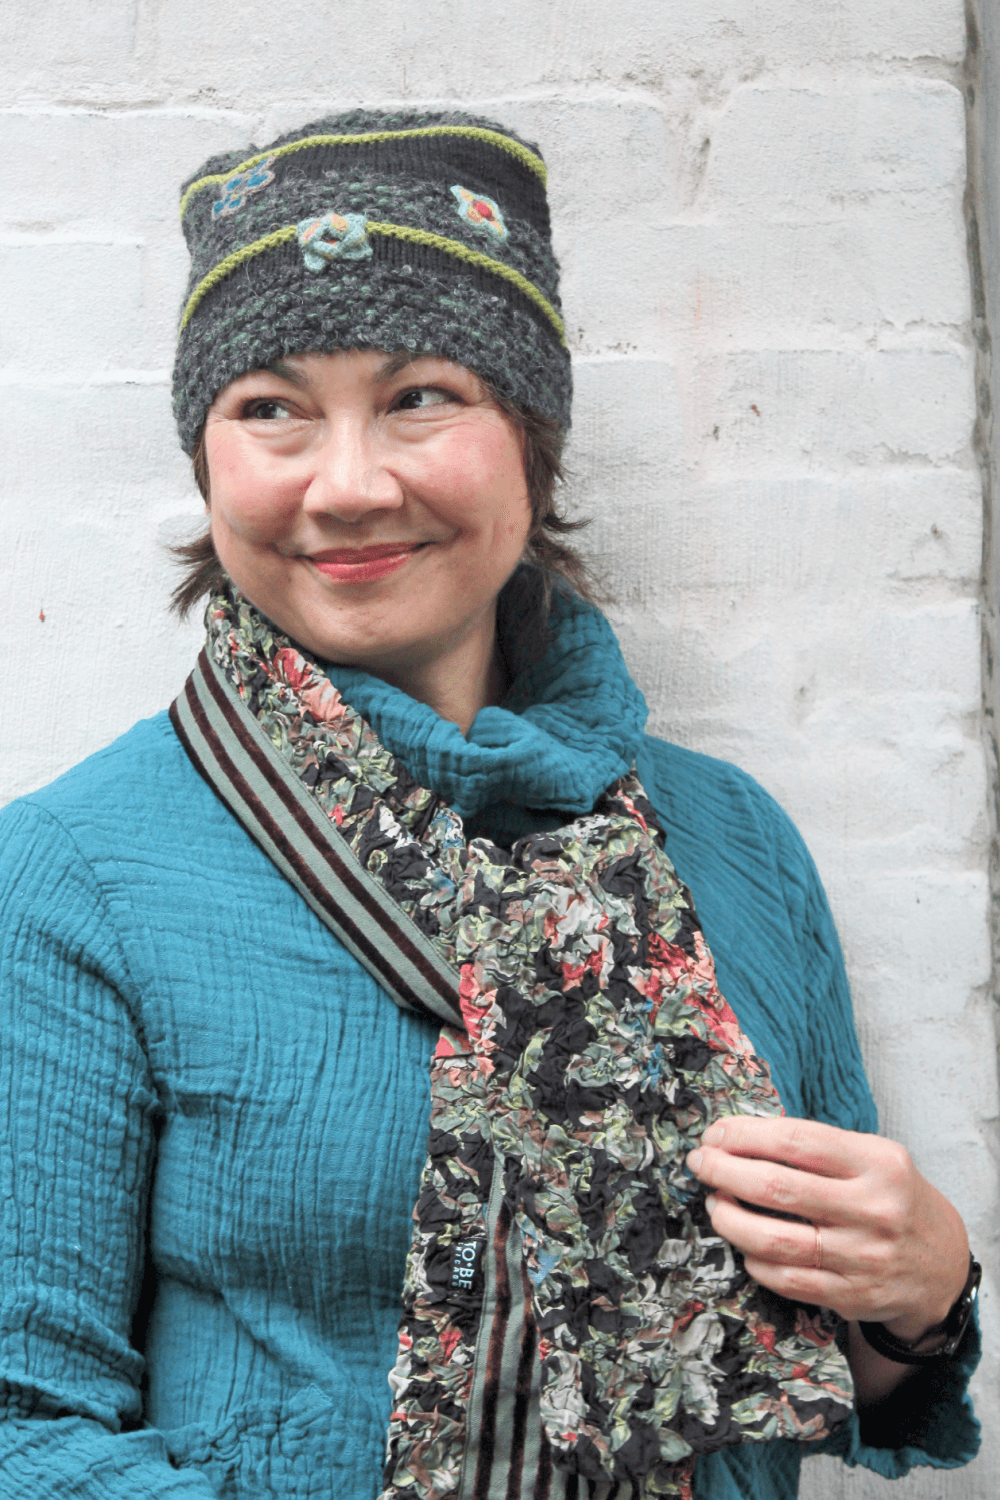 Crinkle Velvet Scarf with hat and scarf being worn on a smiling woman.